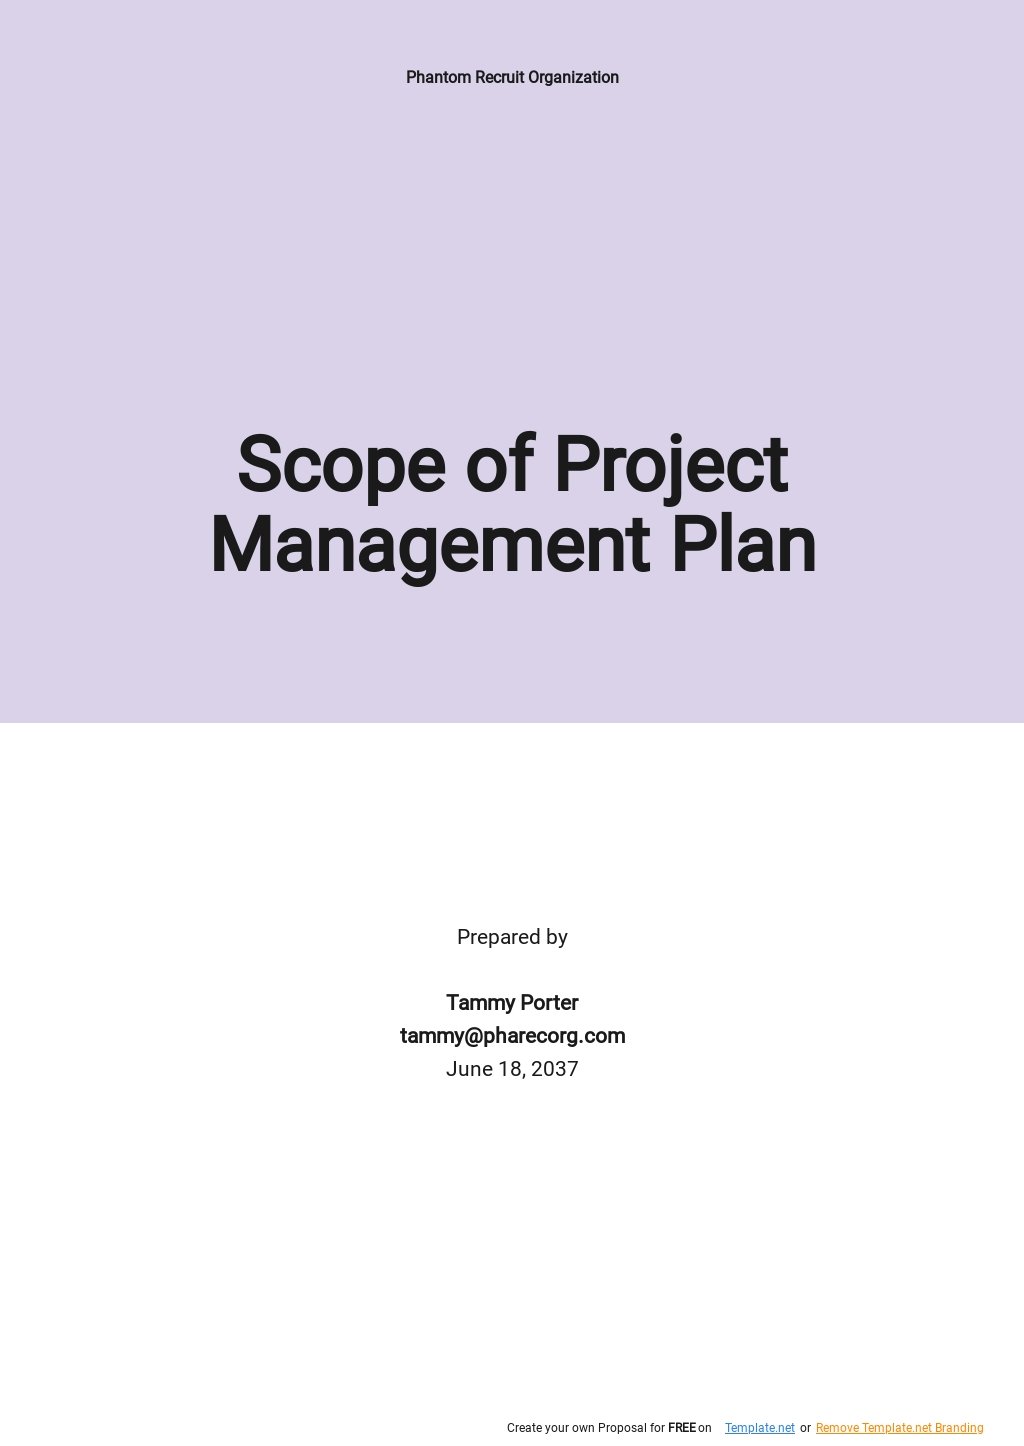 Scope of Project Management Plan Template.jpe